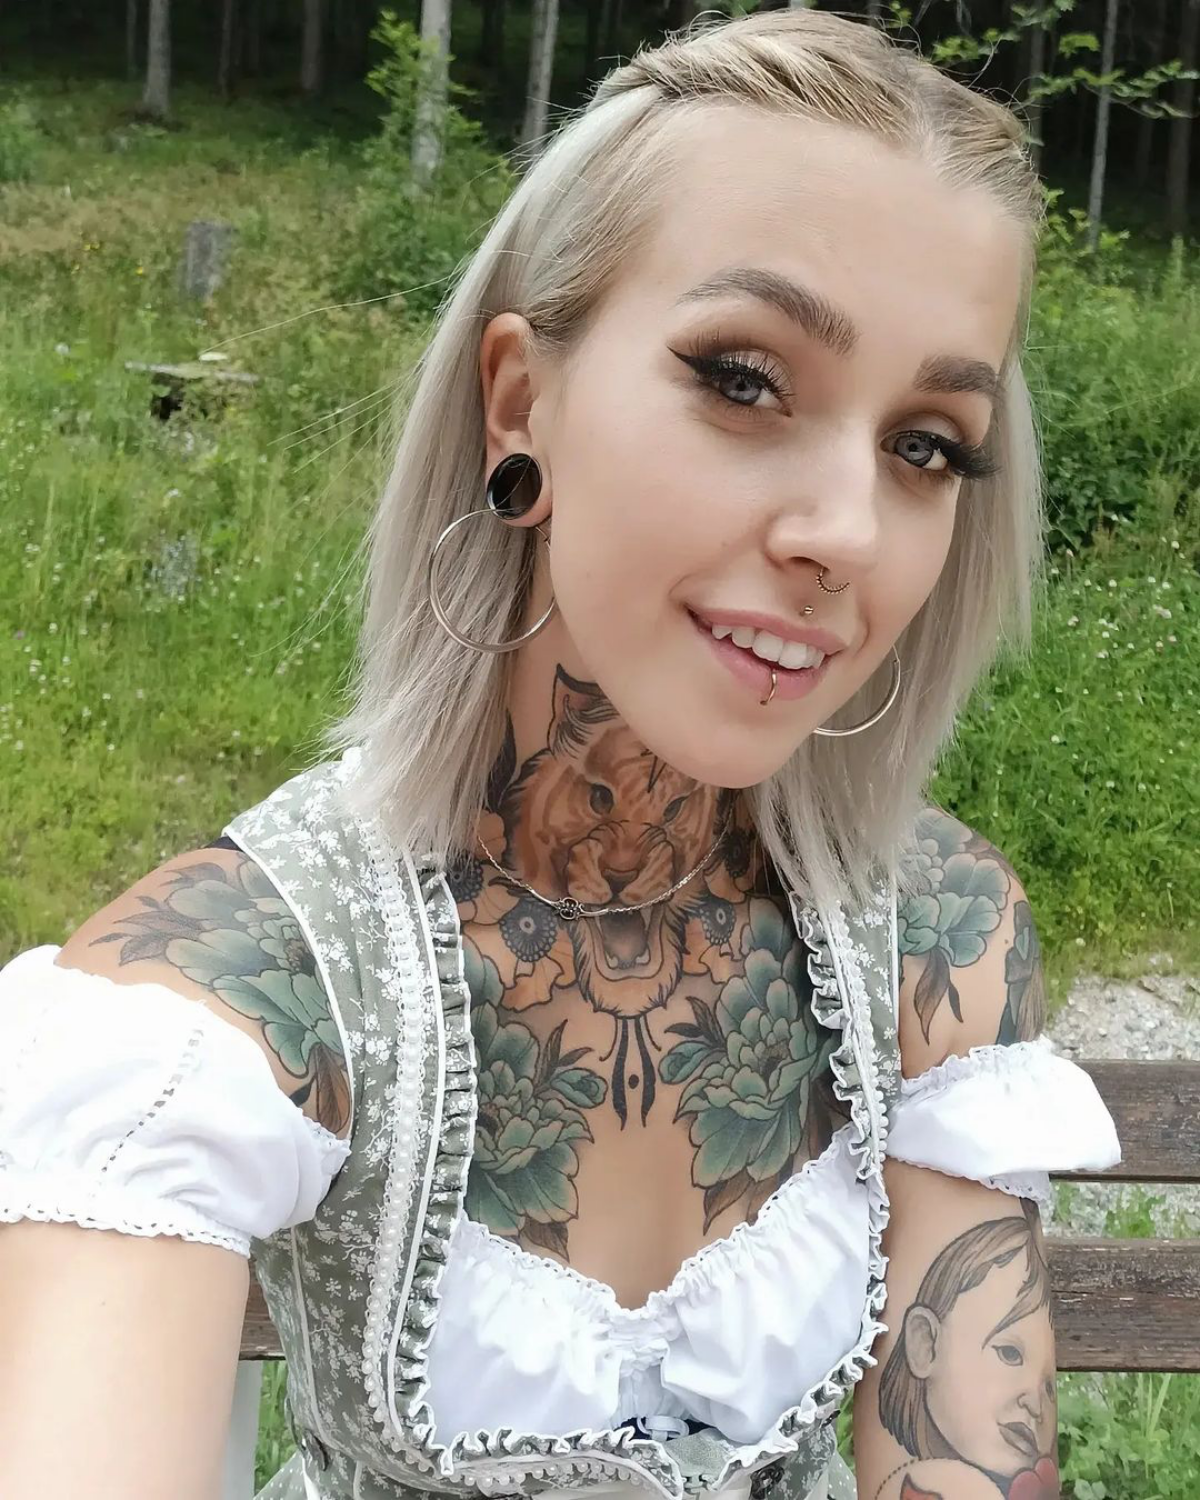 4 woman with face piercings and tattoos